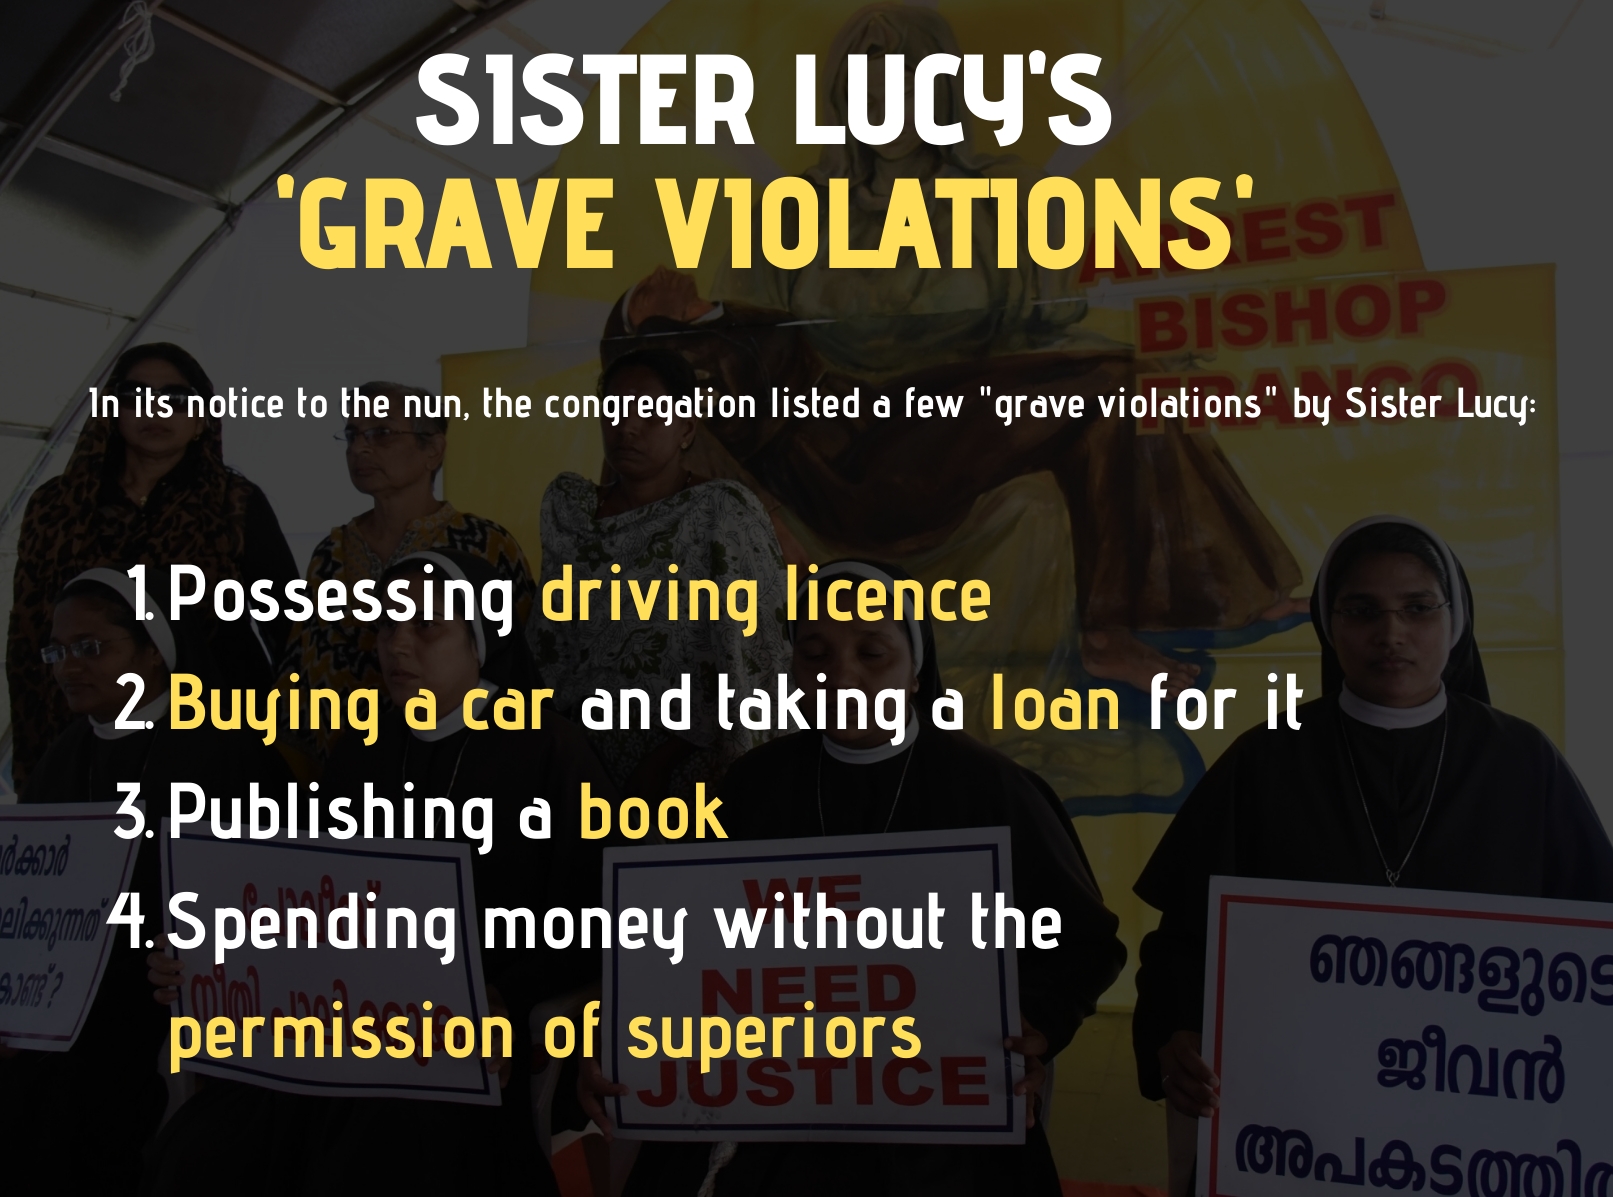 Some of Sister Lucy's 'violations'